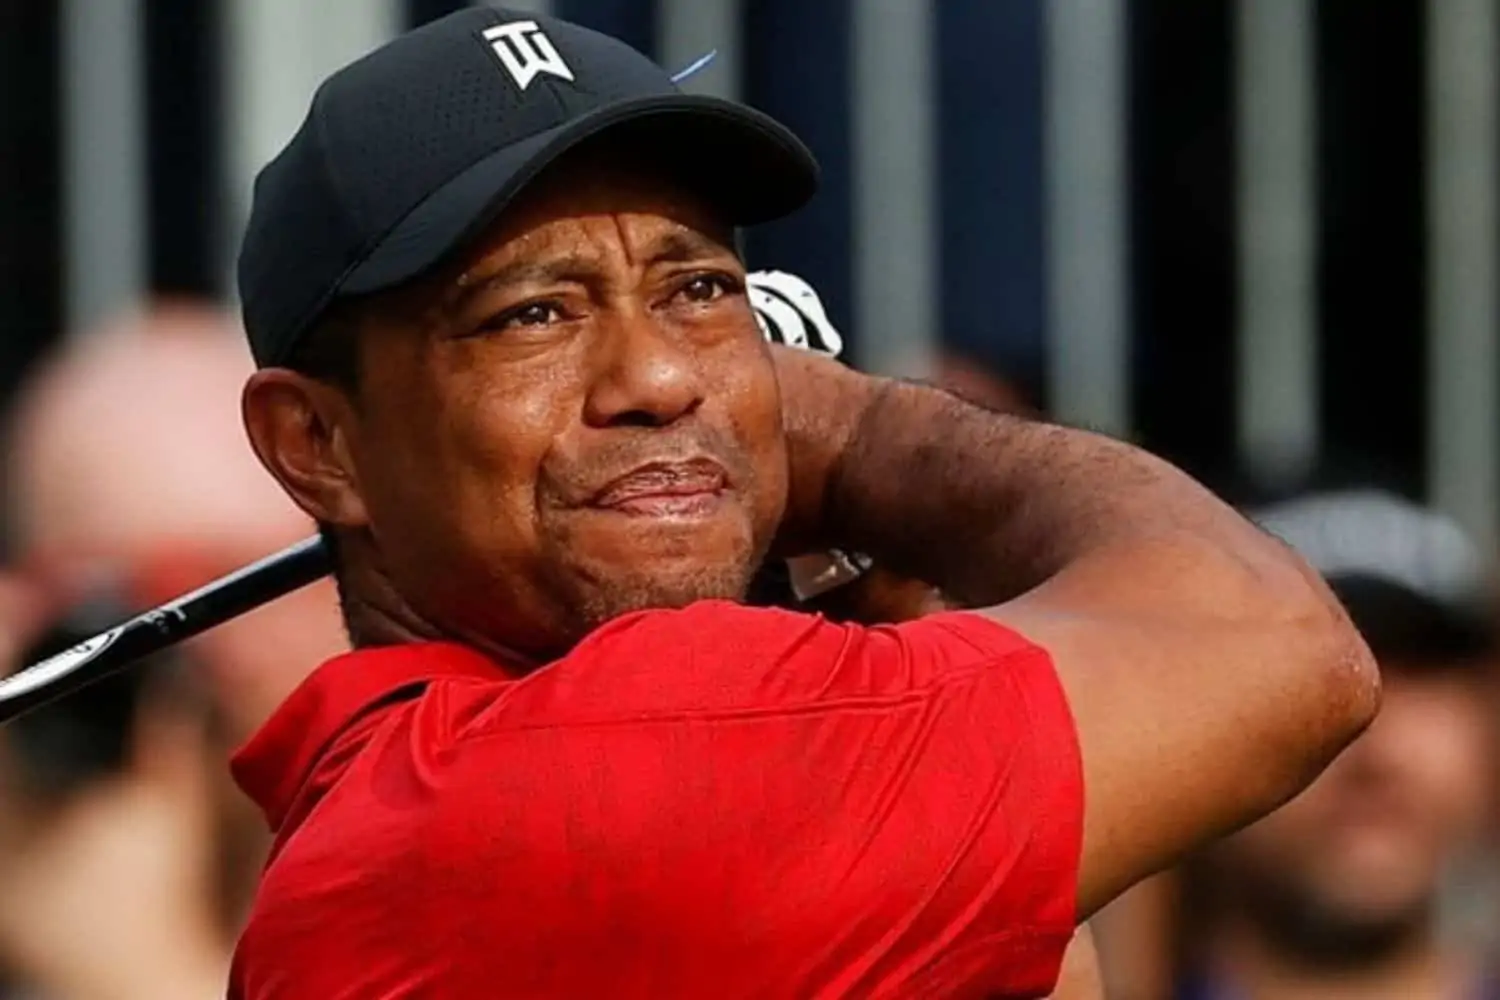 Tiger Woods and his son finishes second at PNC Championship